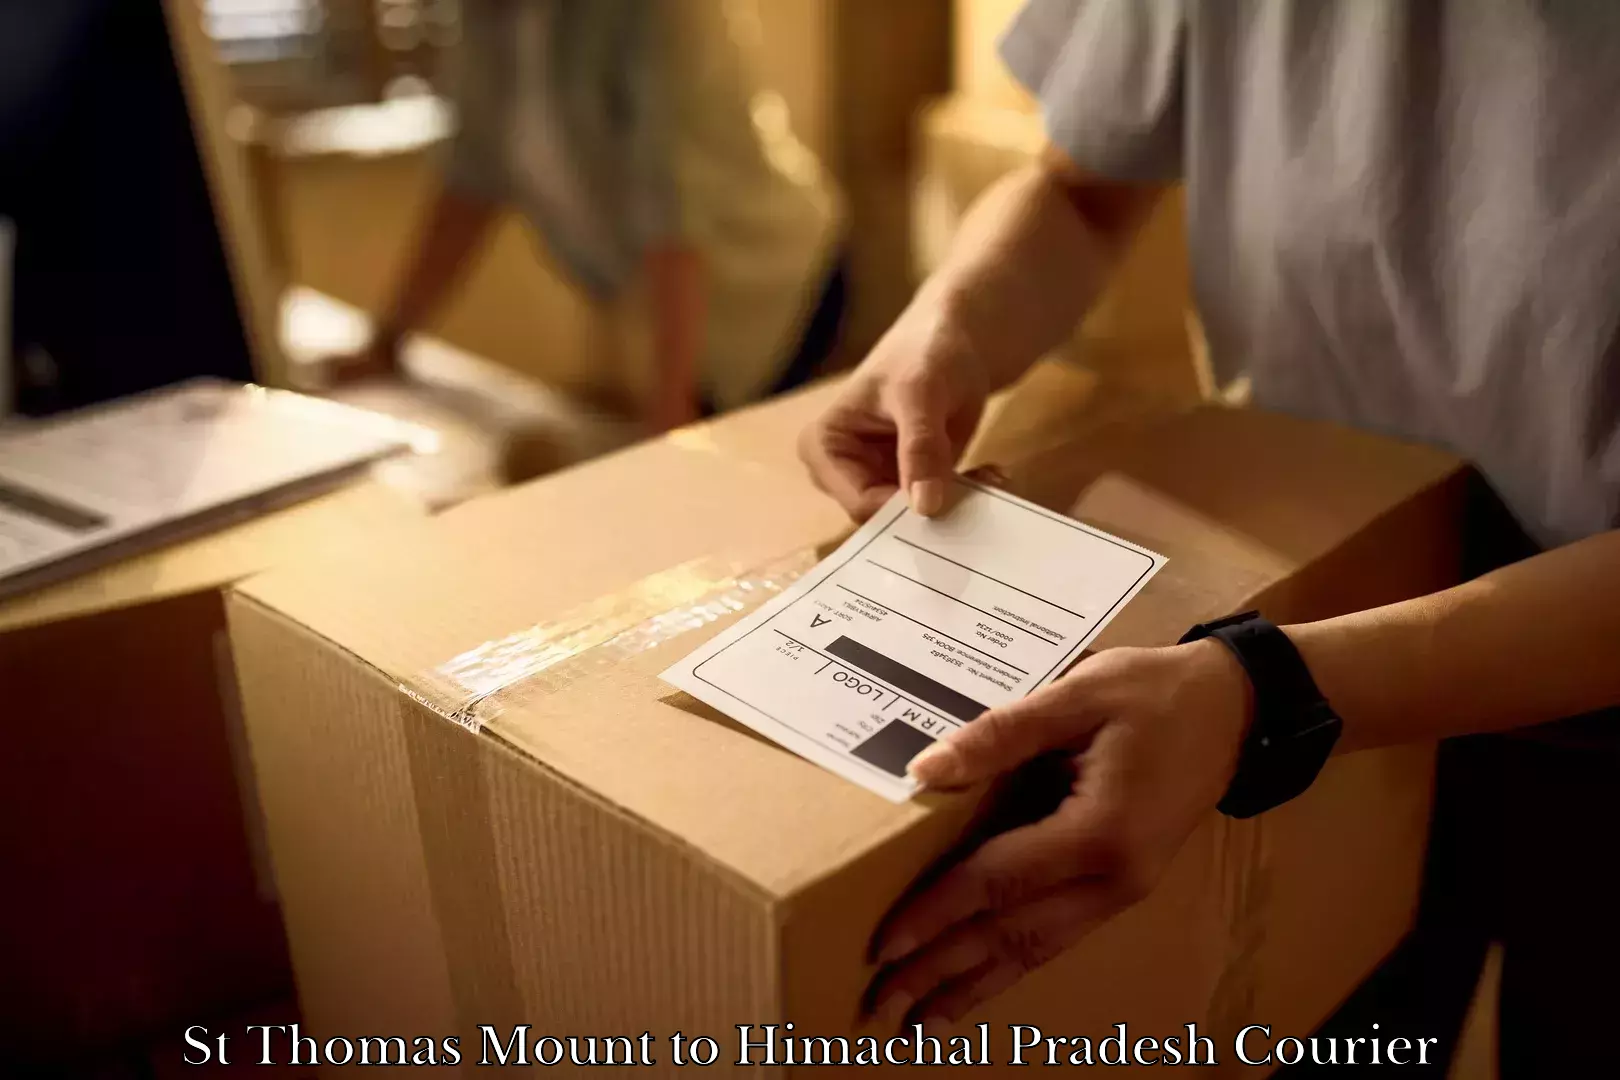 Furniture delivery service St Thomas Mount to Indora